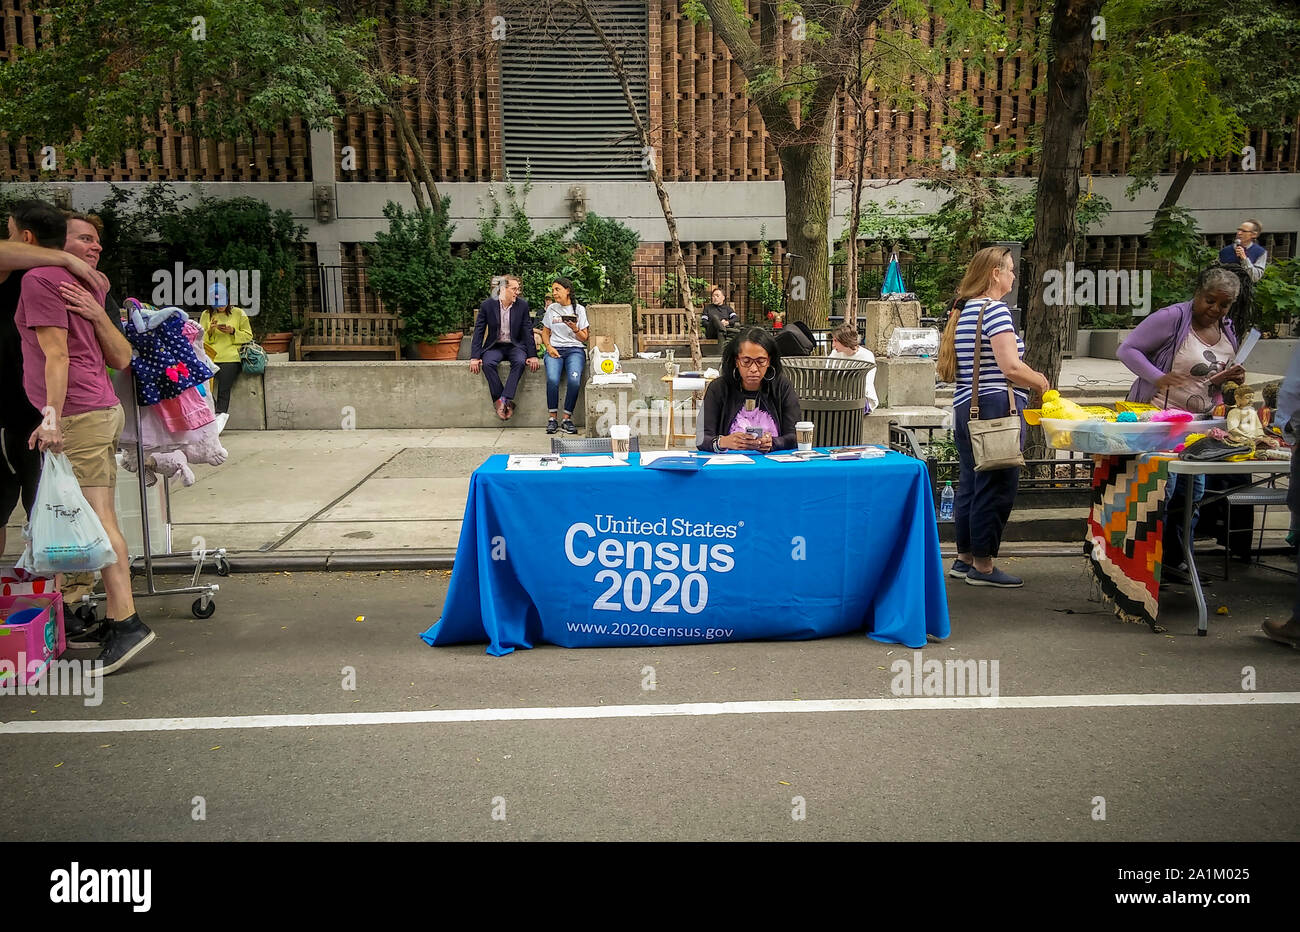 Worker at a Census 2020 information table at a street fair in New York on Saturday, September 14, 2019. The census is a count of everyone living in the United States, citizens and non-citizens. By law it is conducted every 10 years and the information is used to reapportion congressional districts as well as affecting the distribution of government funds.  (© Richard B. Levine) Stock Photo